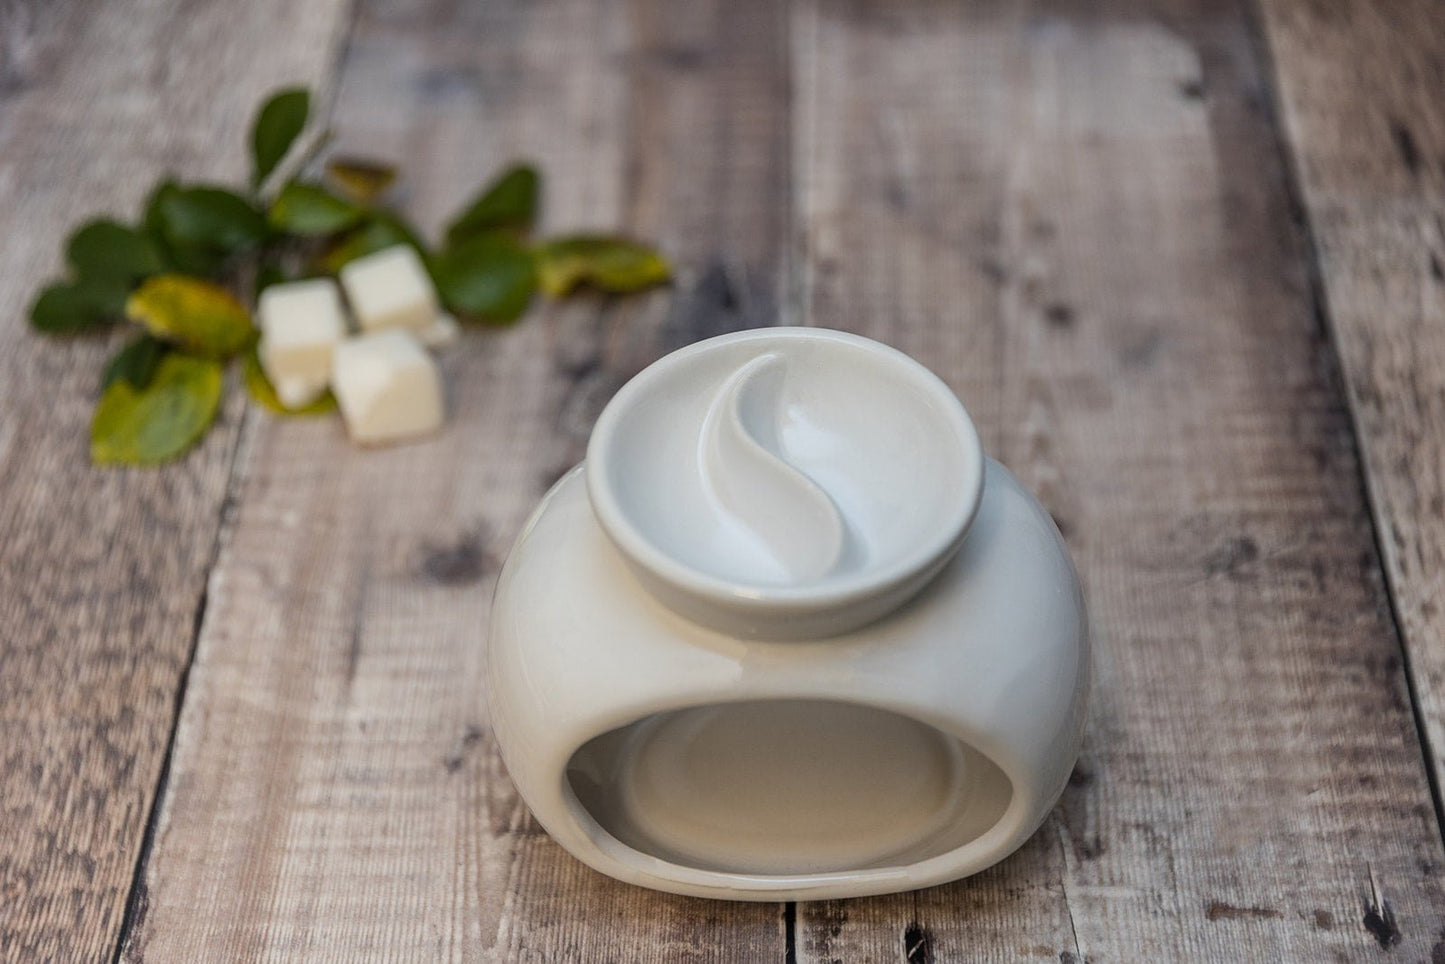 White Ceramic Oval Double Dish Wax Burner - A Melt In Time Ltd